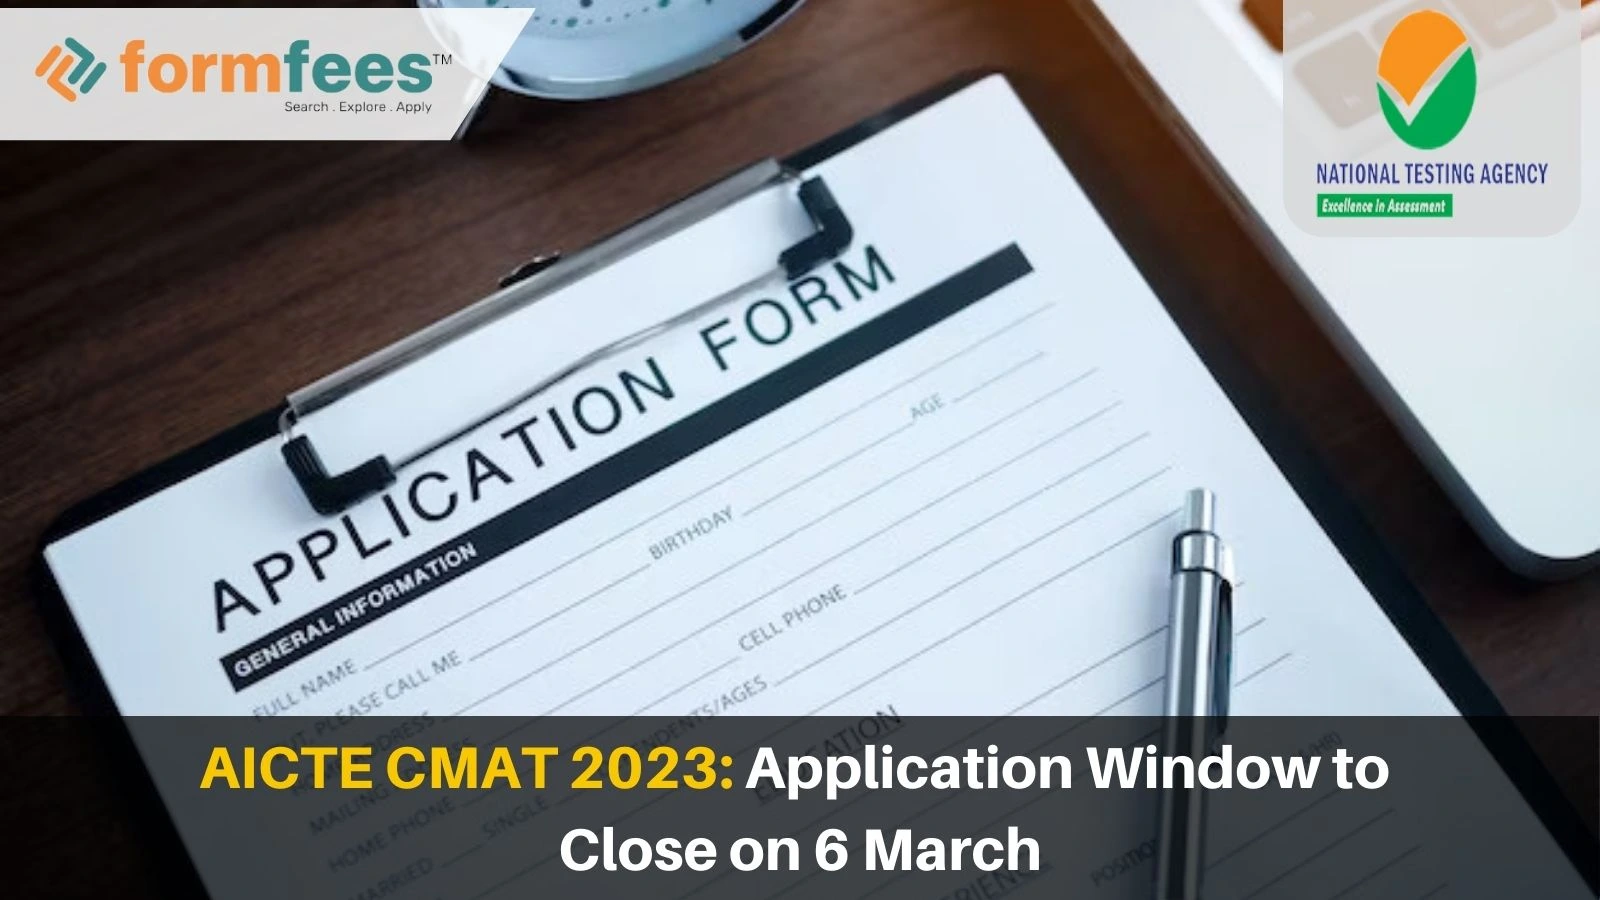 AICTE CMAT 2023: Application Window to Close on 6 March